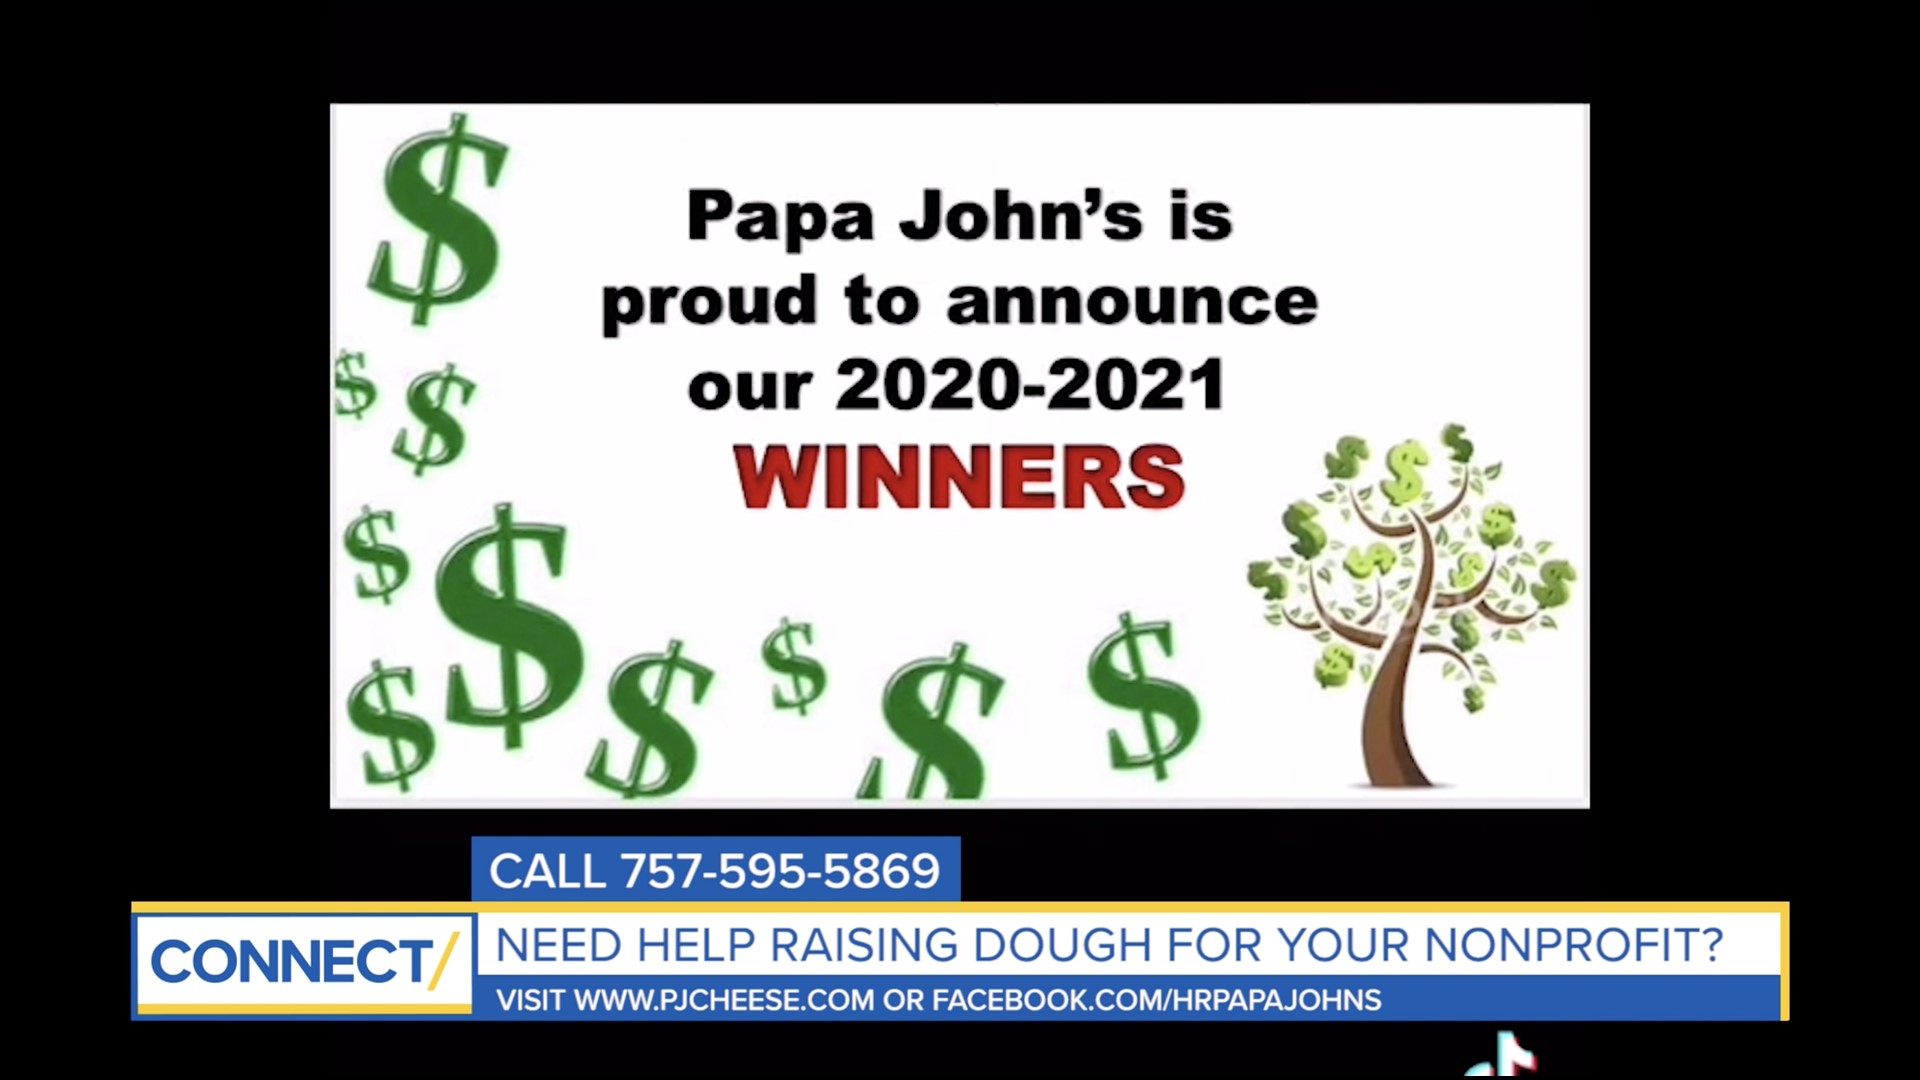 Sign your school up for Dollars for Dough 4.0, and they could win $10,000!